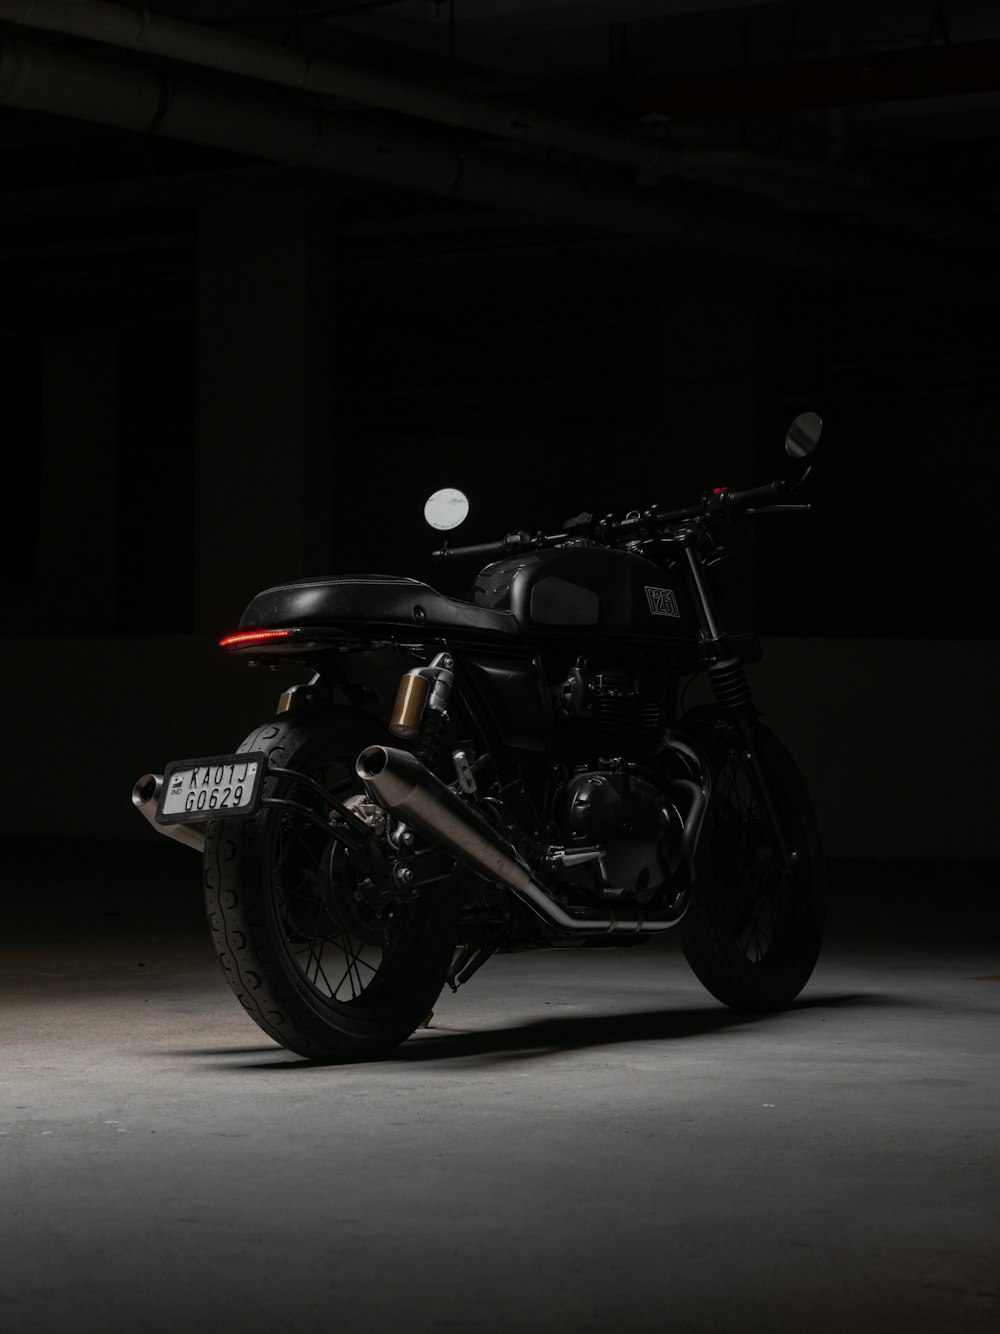 a motorcycle parked in a dark room